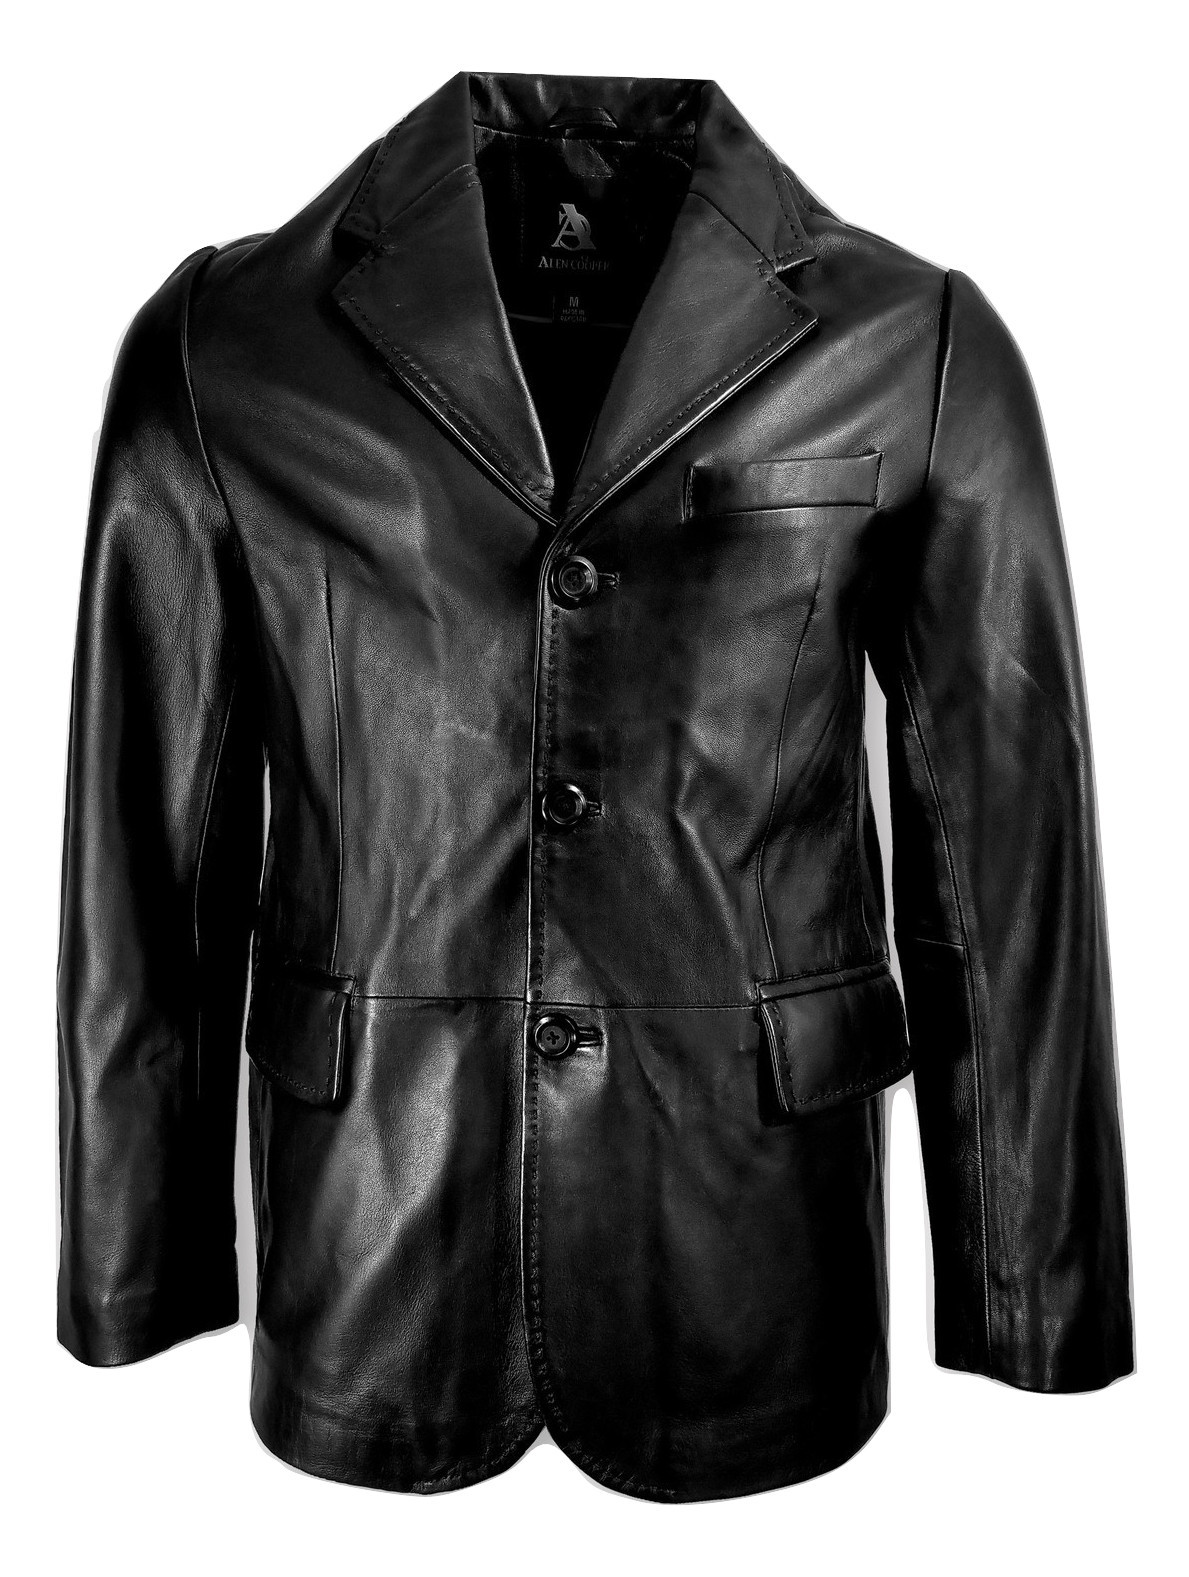 100% GENUINE ITALIAN LEATHER JACKET WITH LAPEL COLLAR STYLE FOR MEN ...